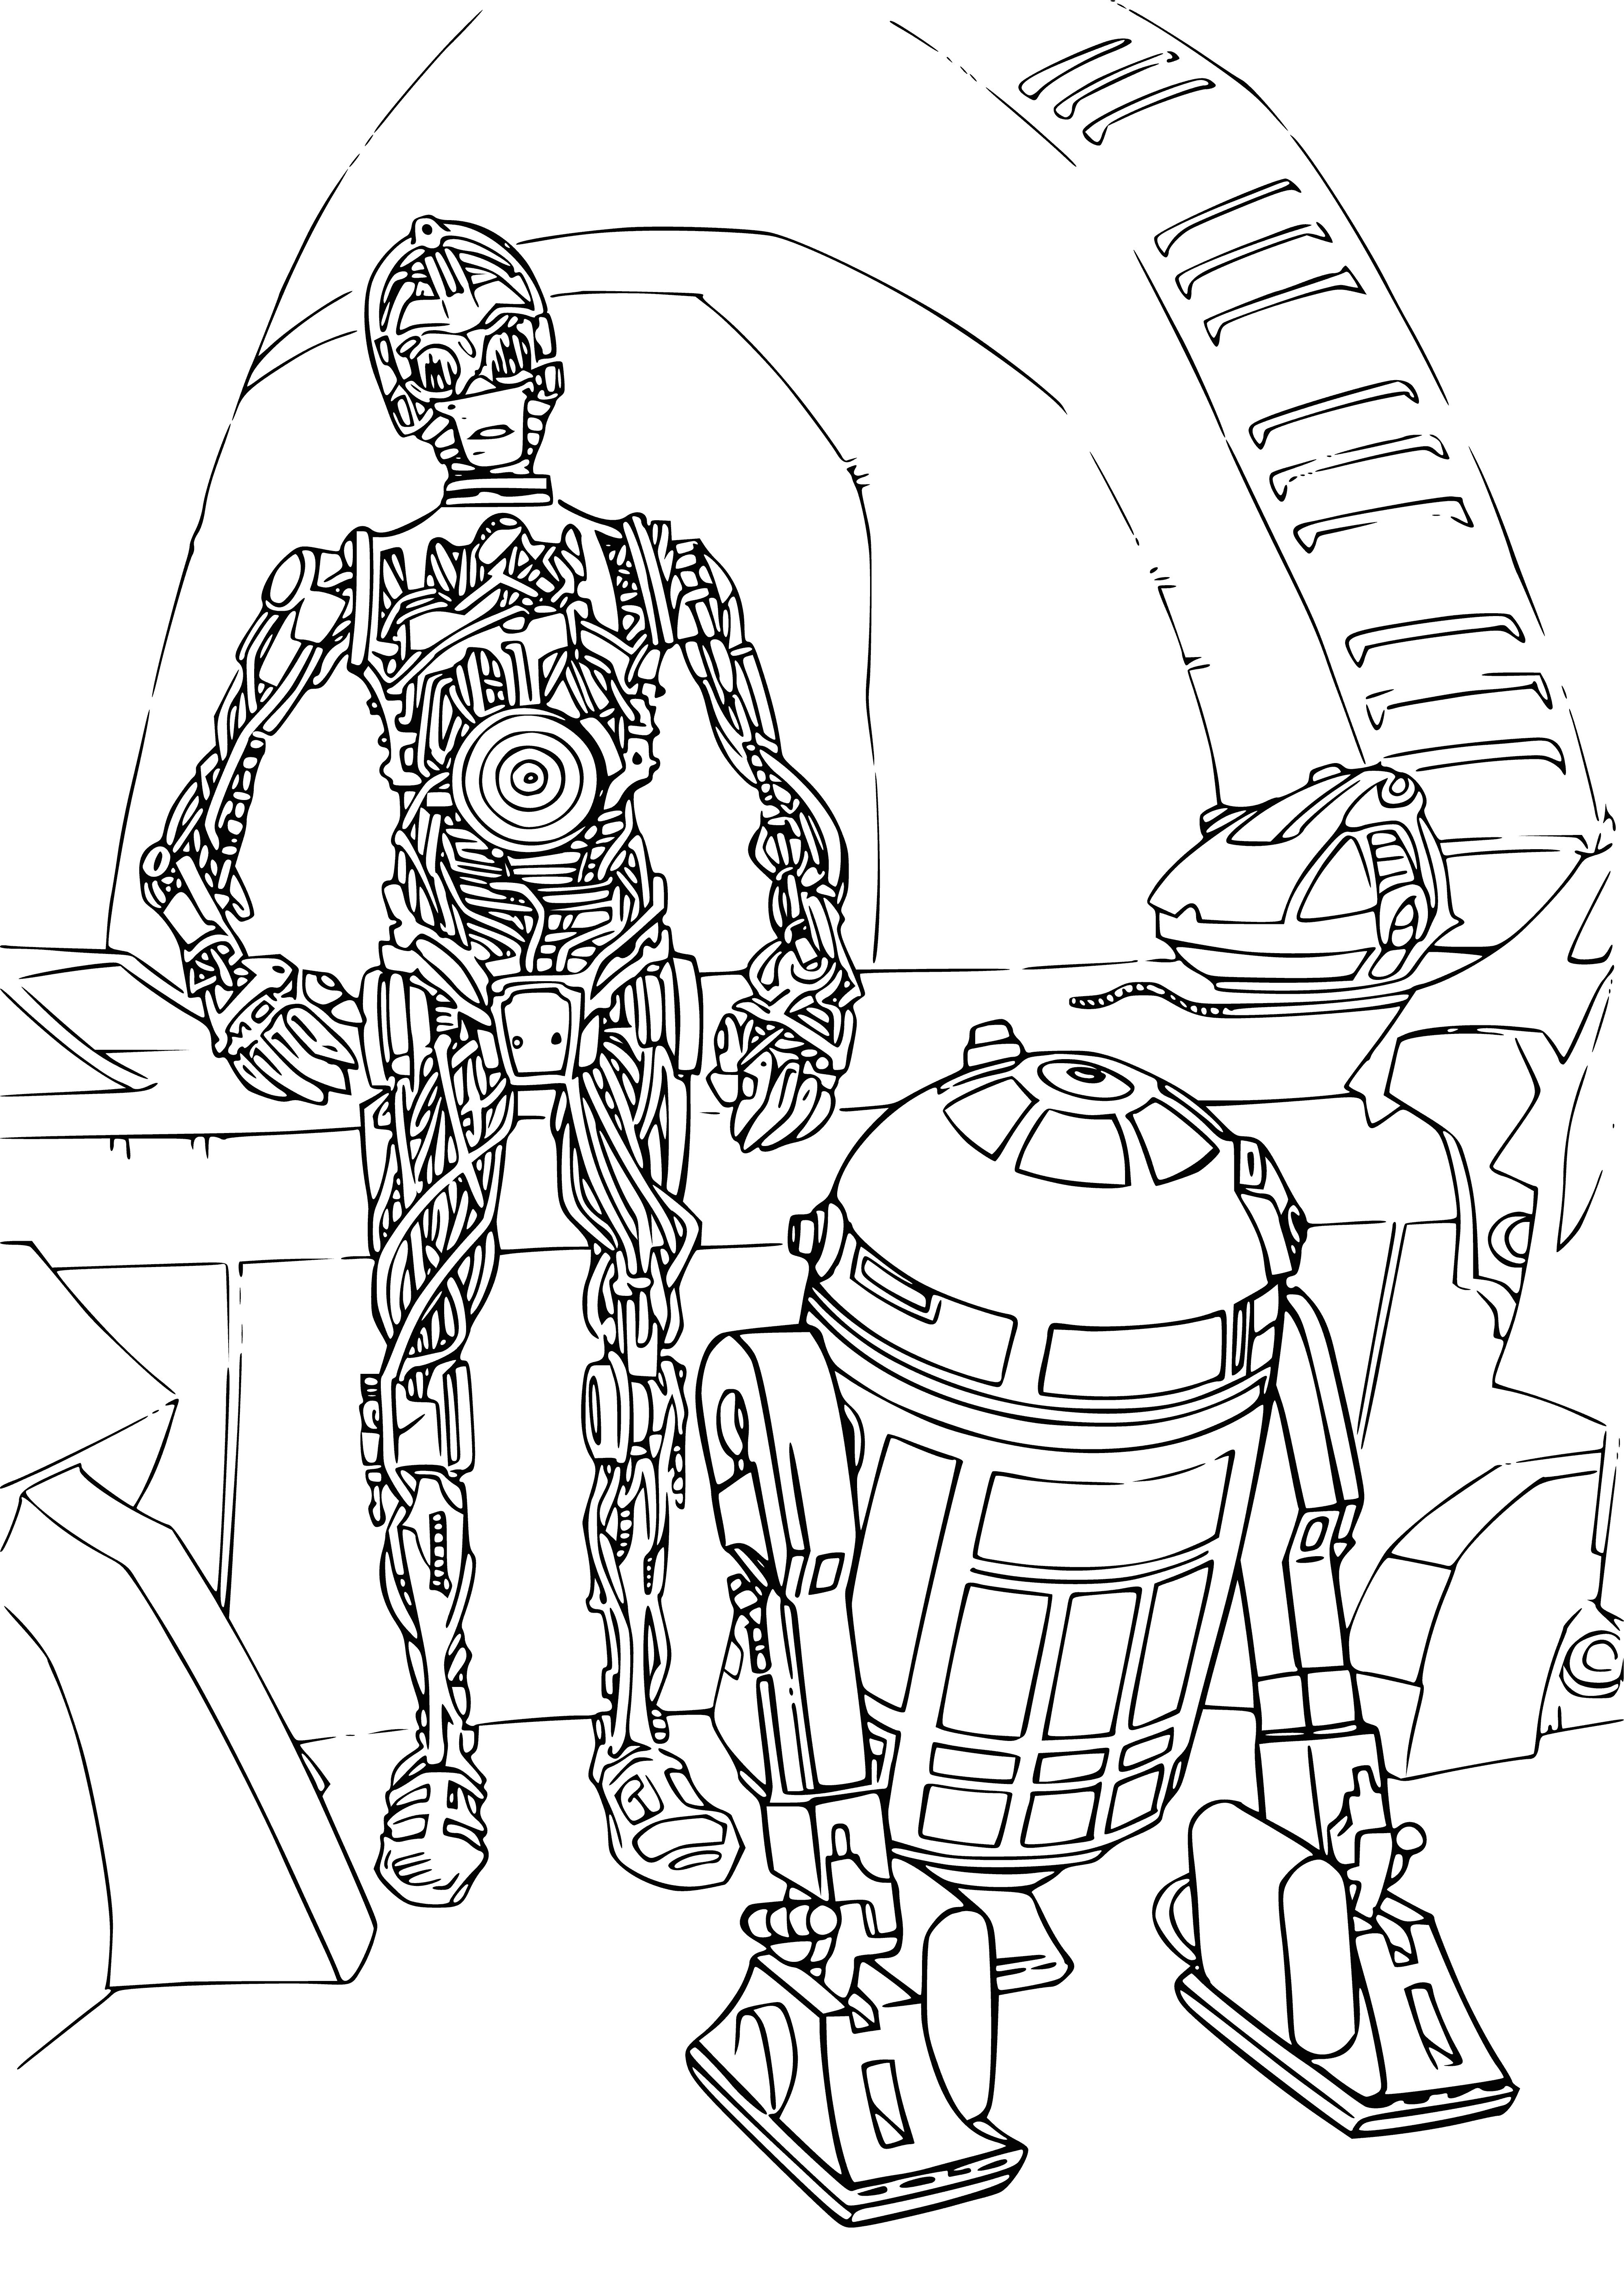 Si-Tripio and R2-D2 coloring page